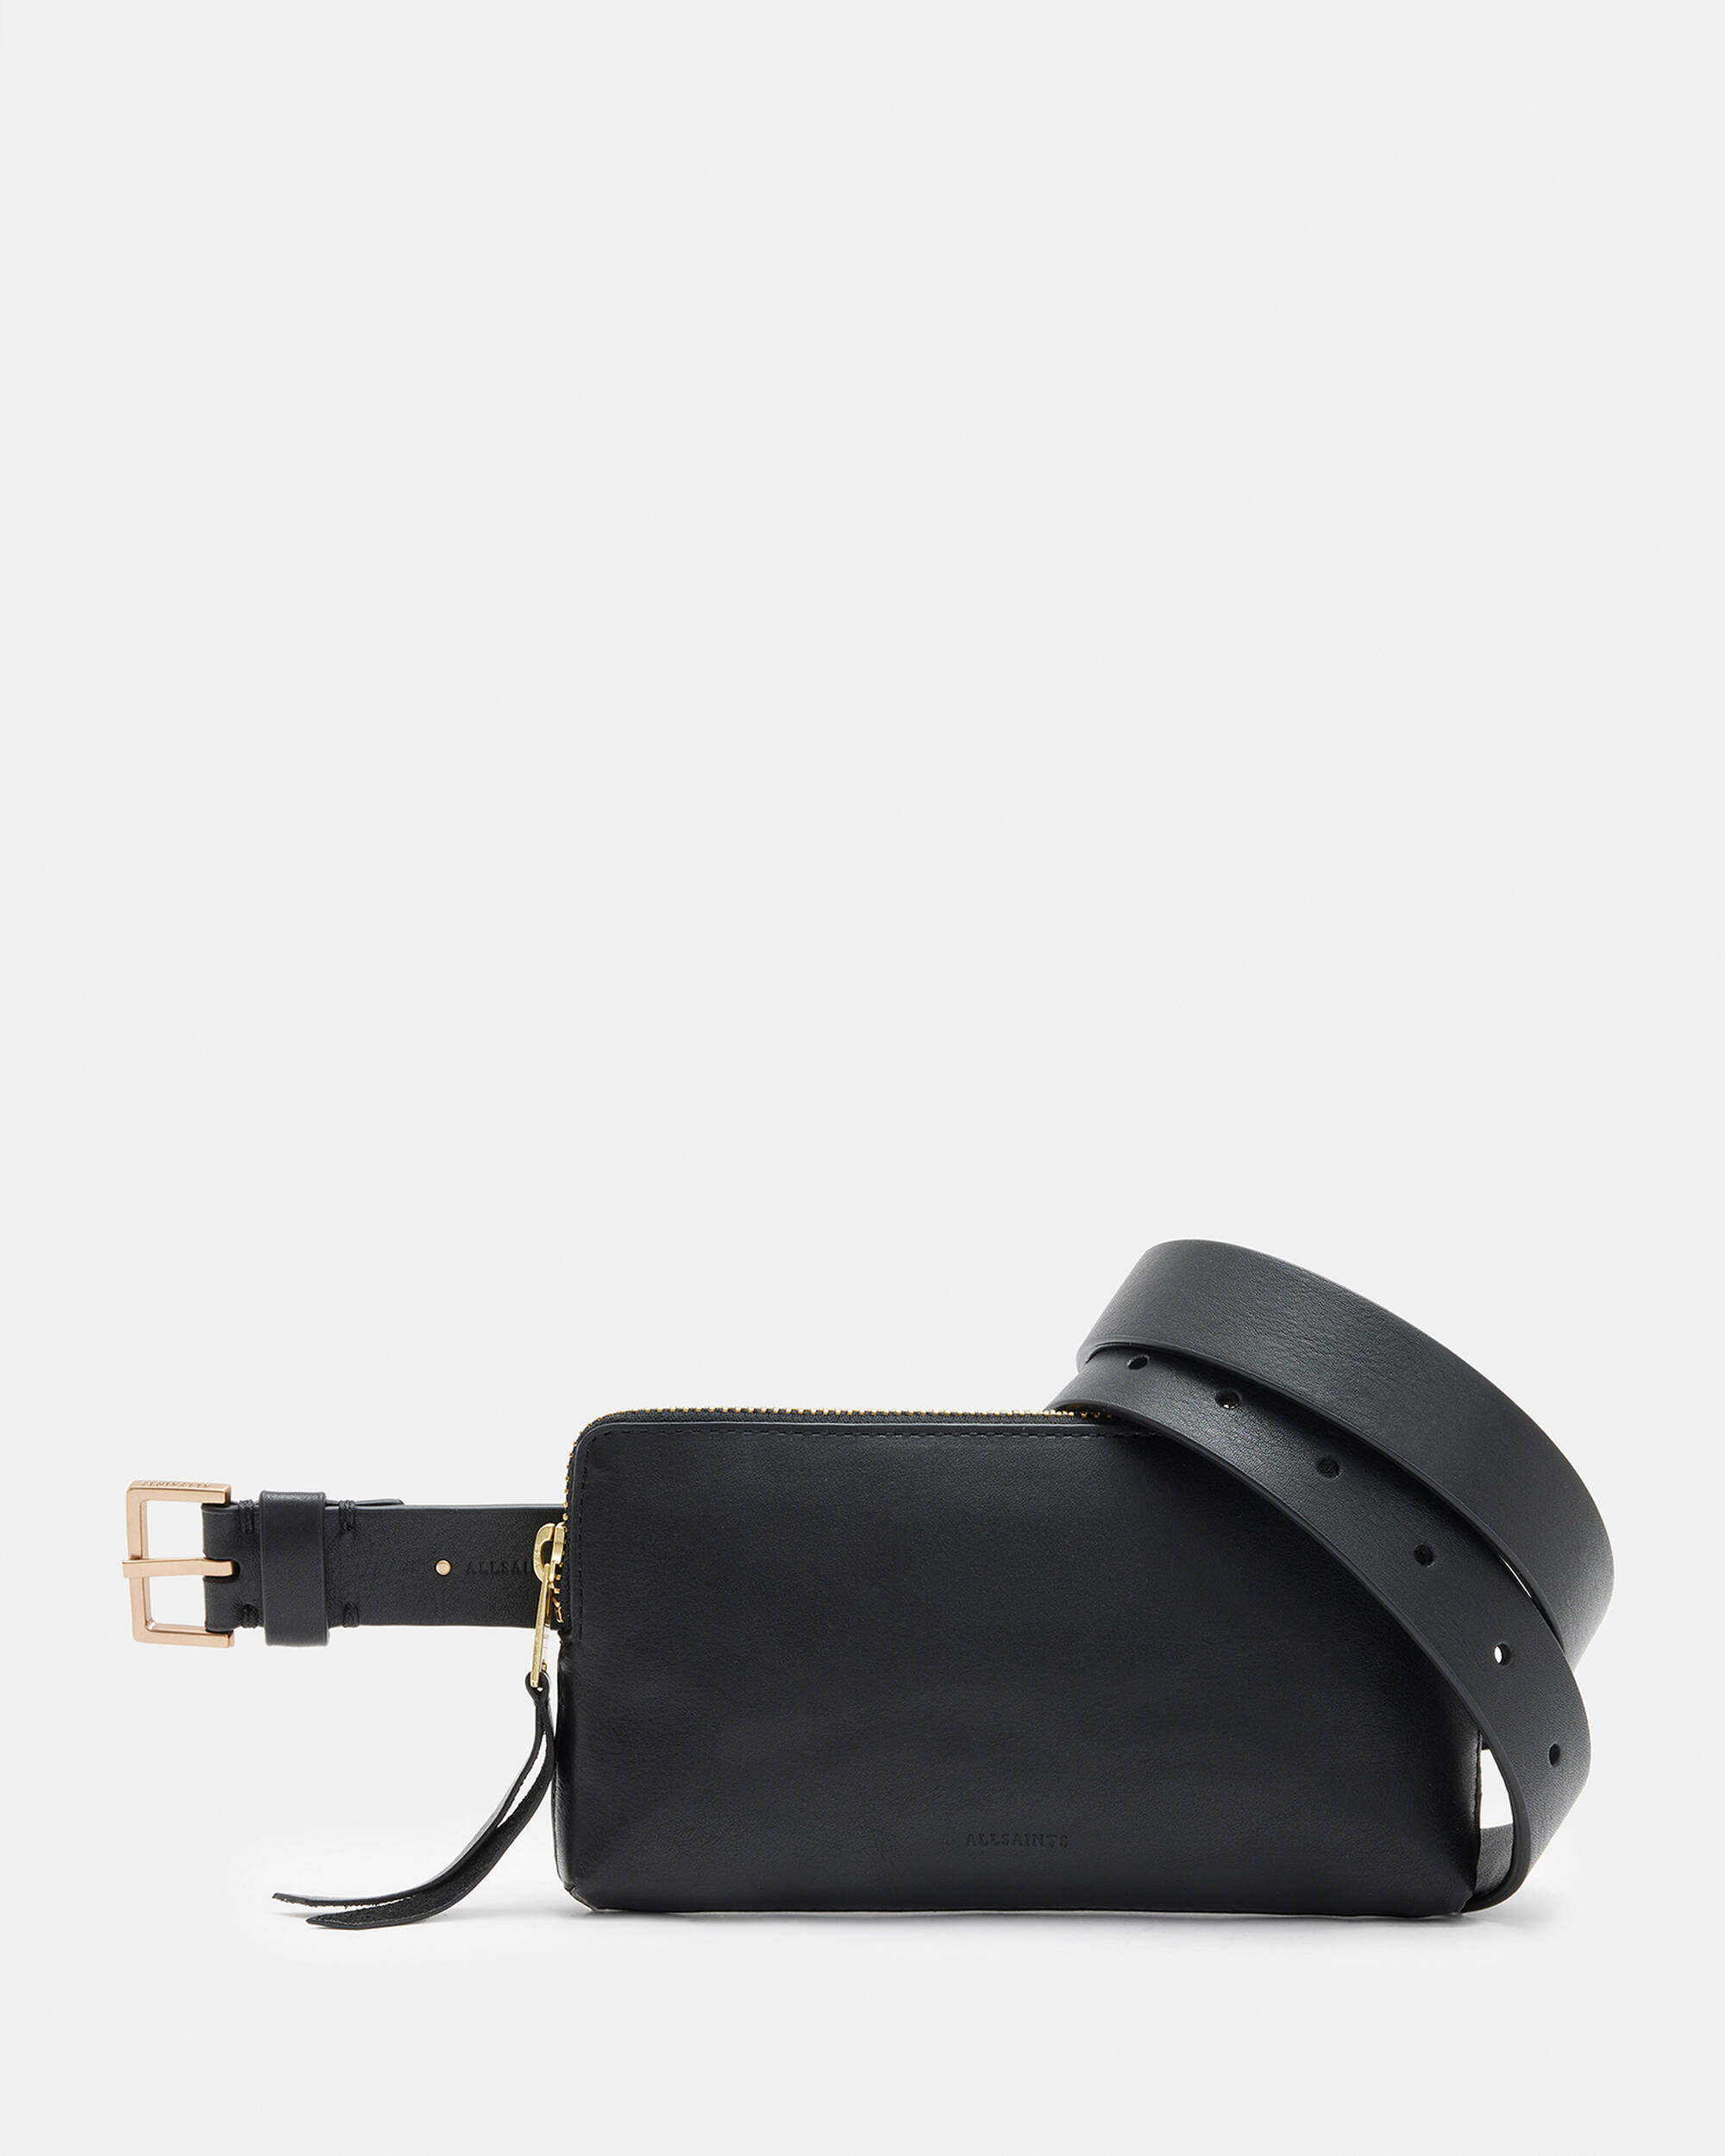 Lila AllSaints Leather Fanny Pack  large image number 1